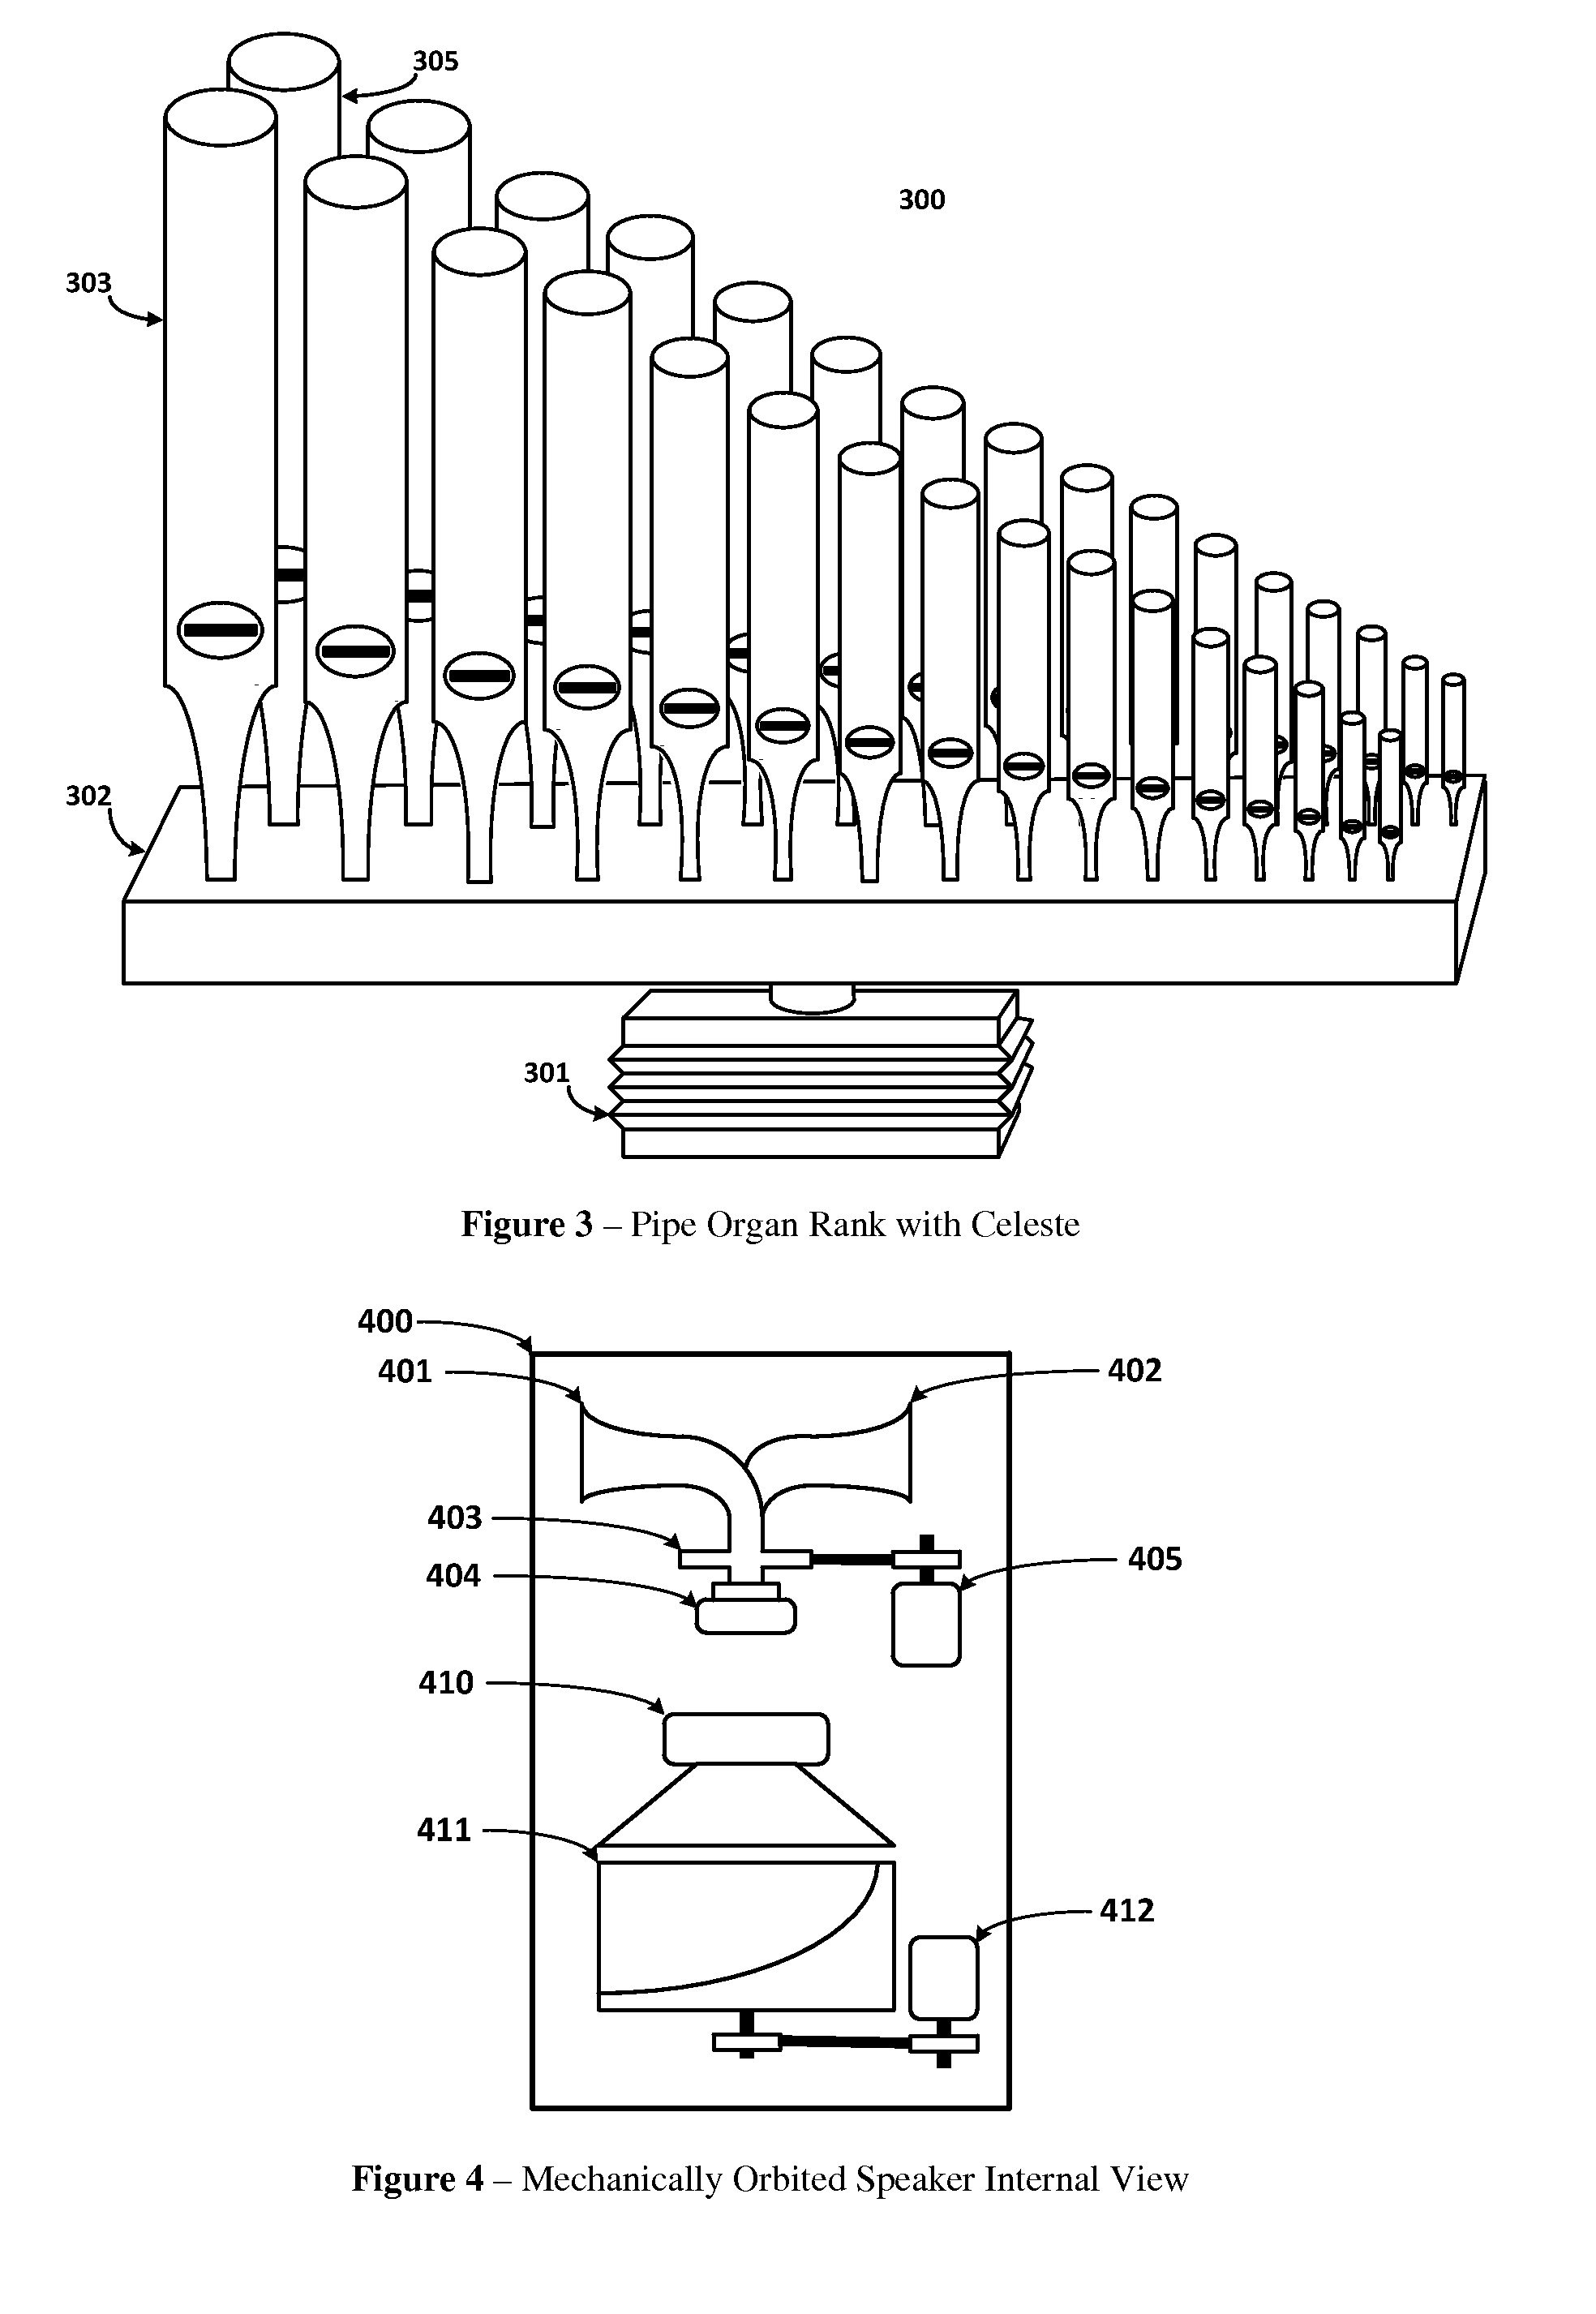 Apparatus and Method for a Celeste in an Electronically-Orbited Speaker